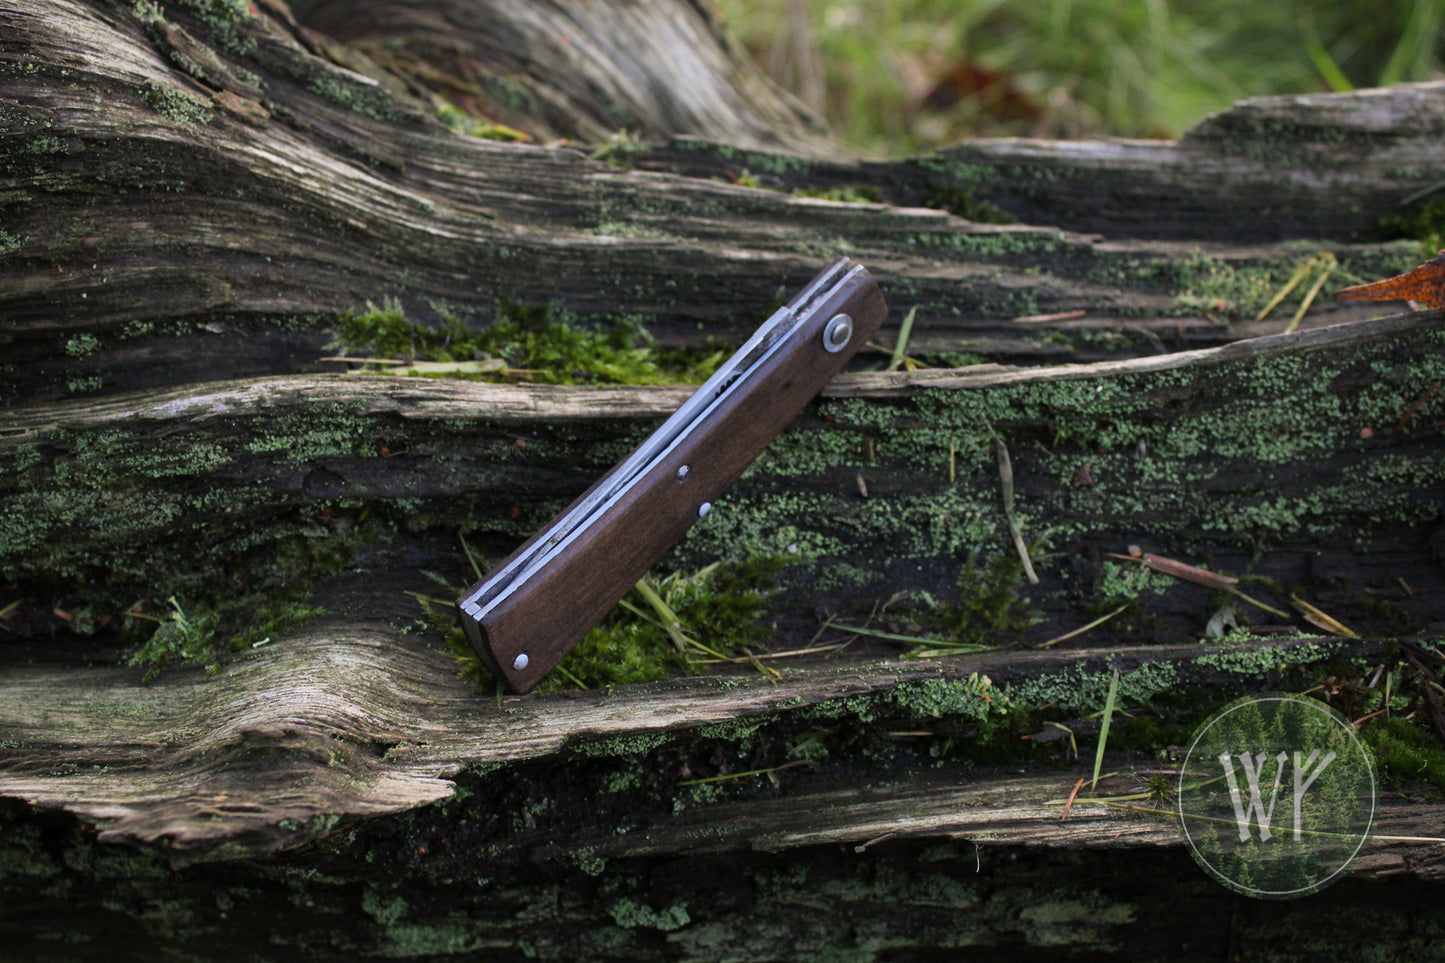 Hand Forged Slipjoint Folding Knife with African Blackwood handle